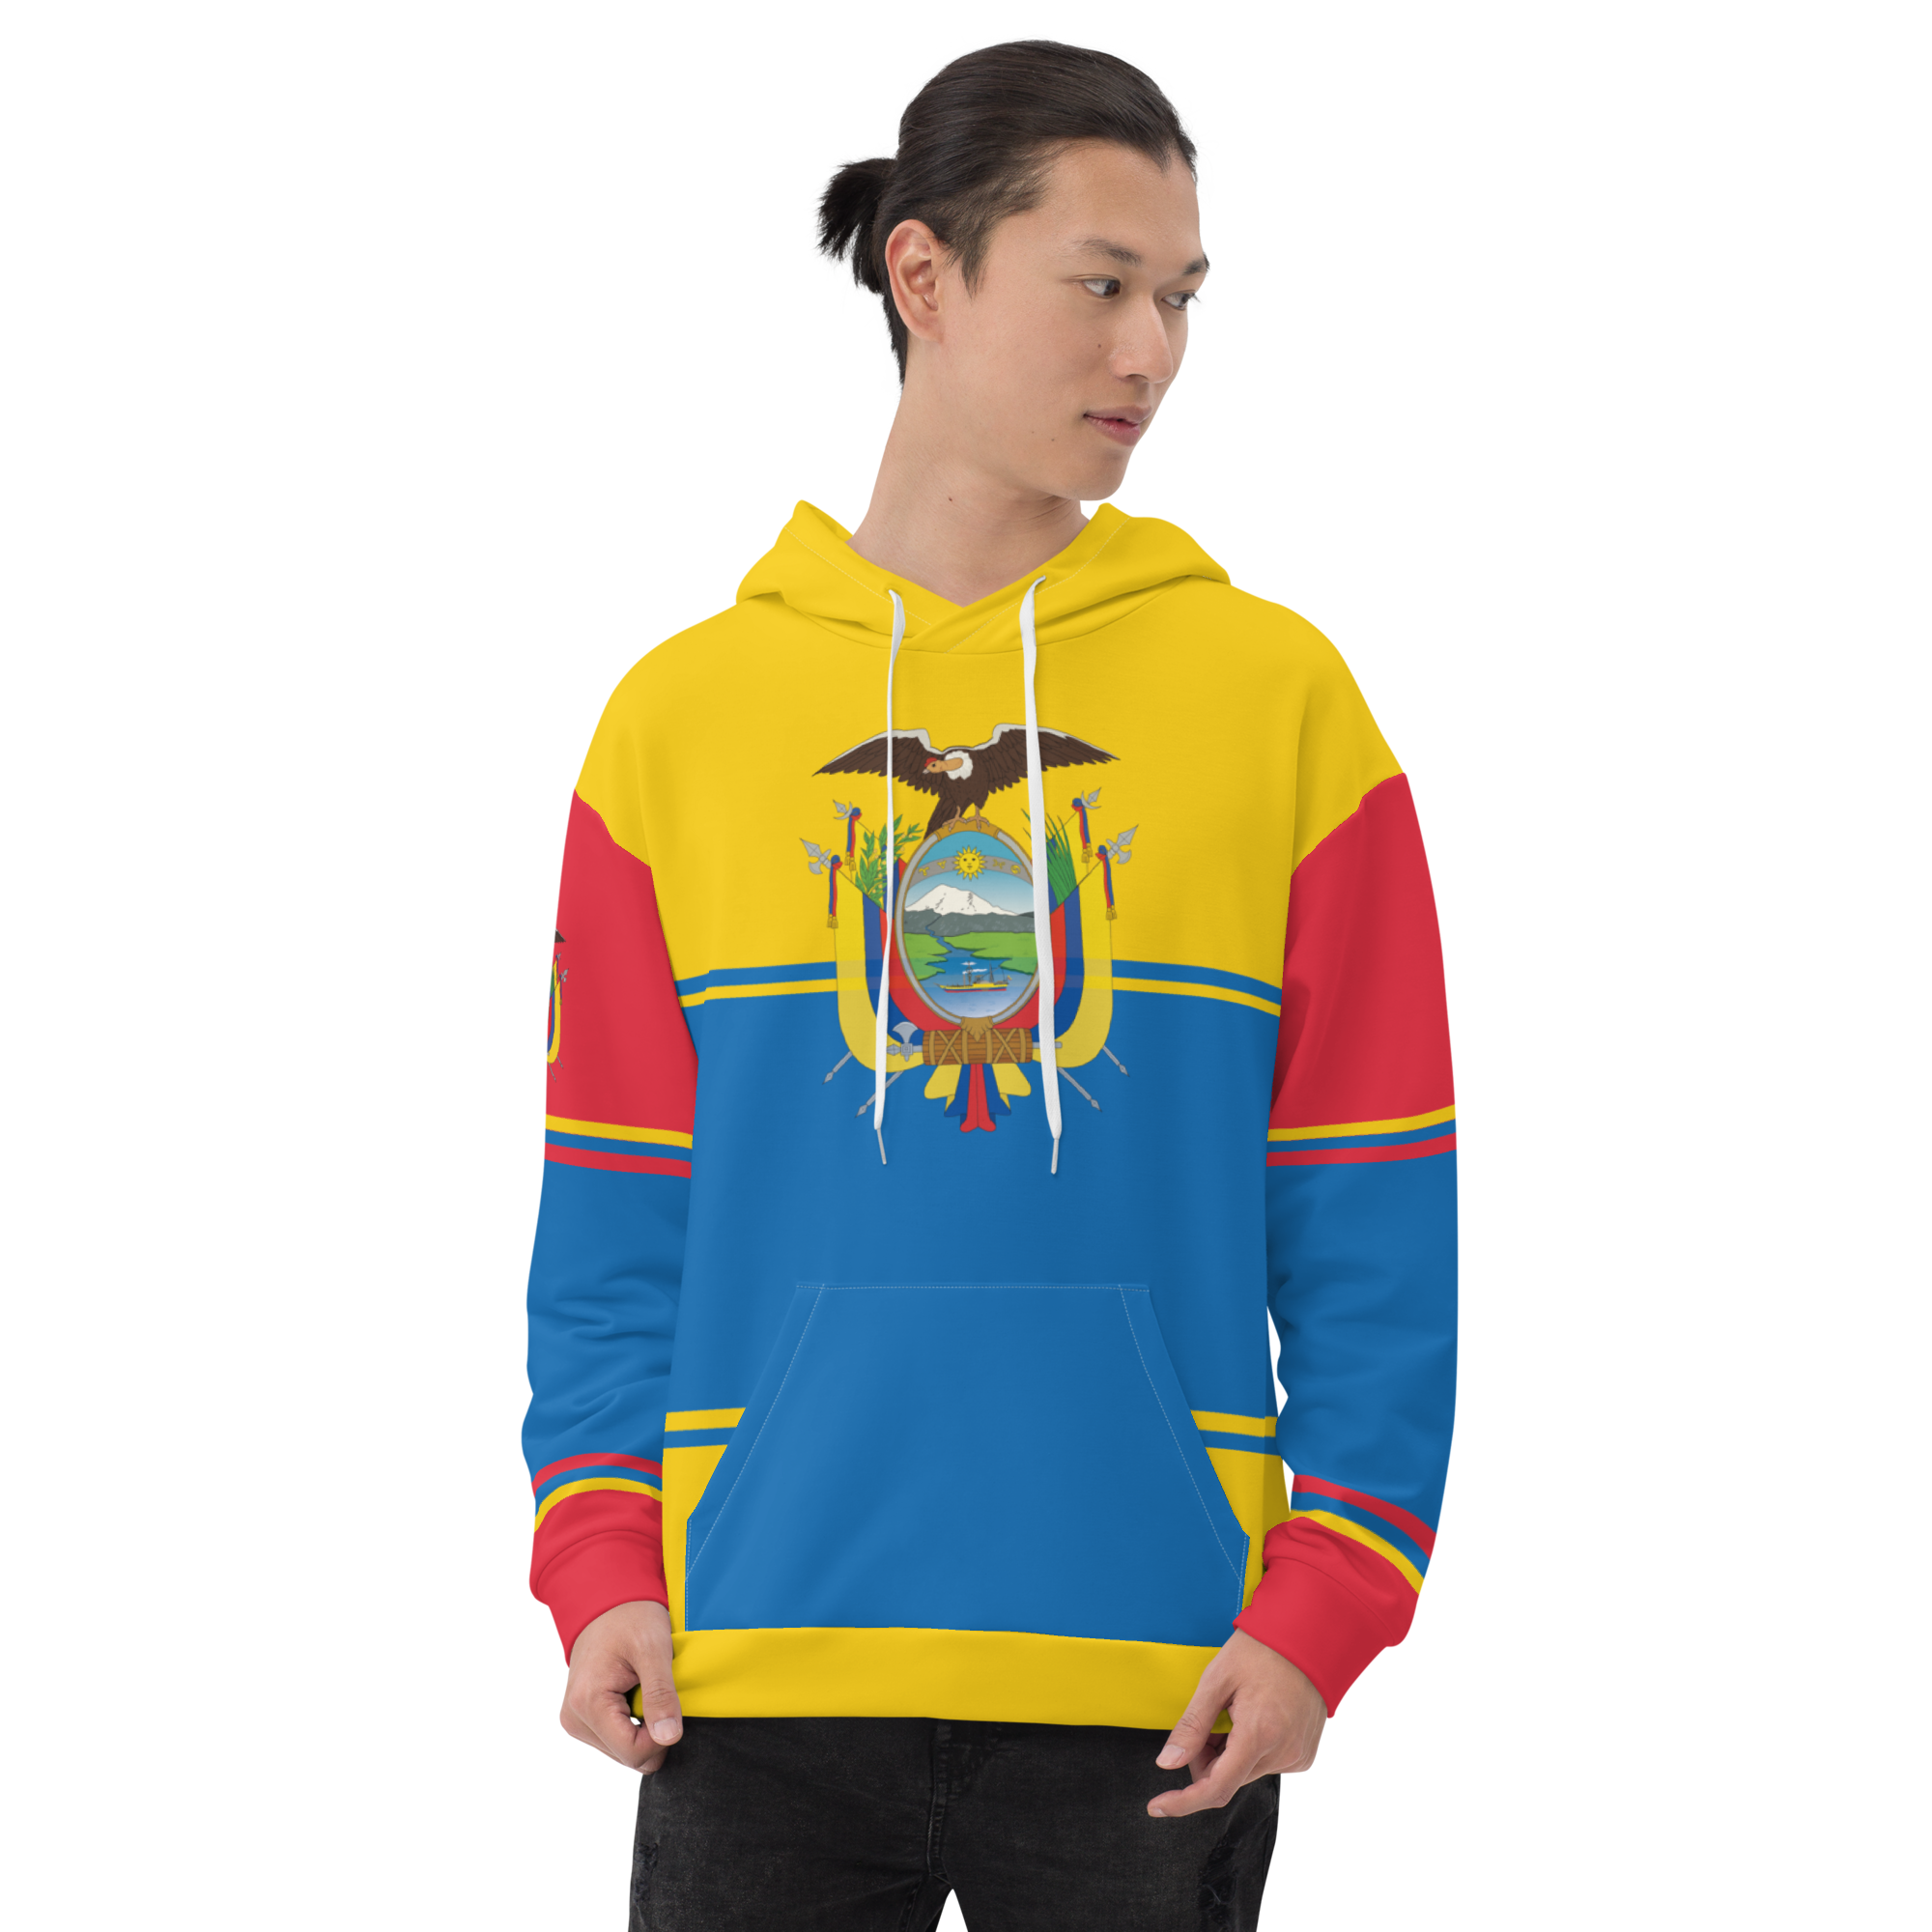 New 2023 arrivals! My colorful Ecuador flag inspired unisex oversized volleyball team hoodies by Volleybragswag are now sold on ETSY!